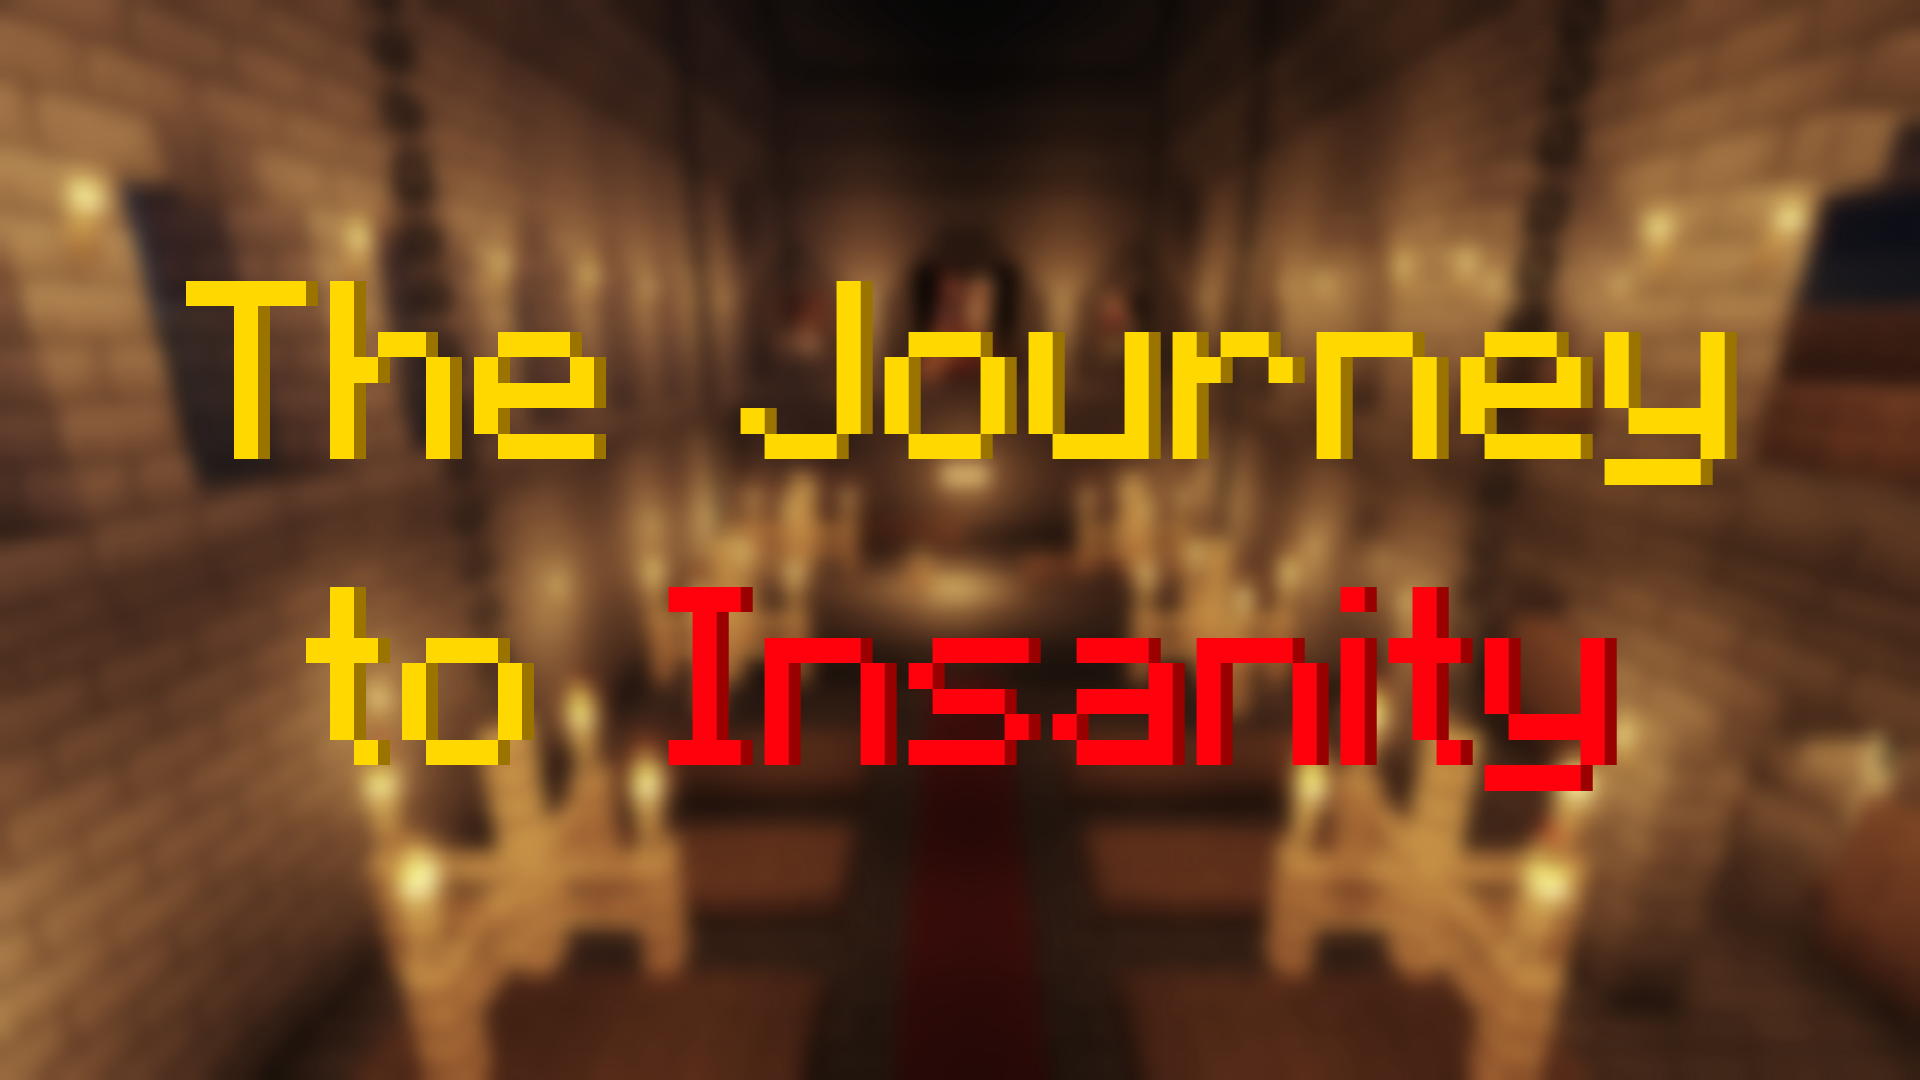 Télécharger The Journey to Insanity pour Minecraft 1.16.5